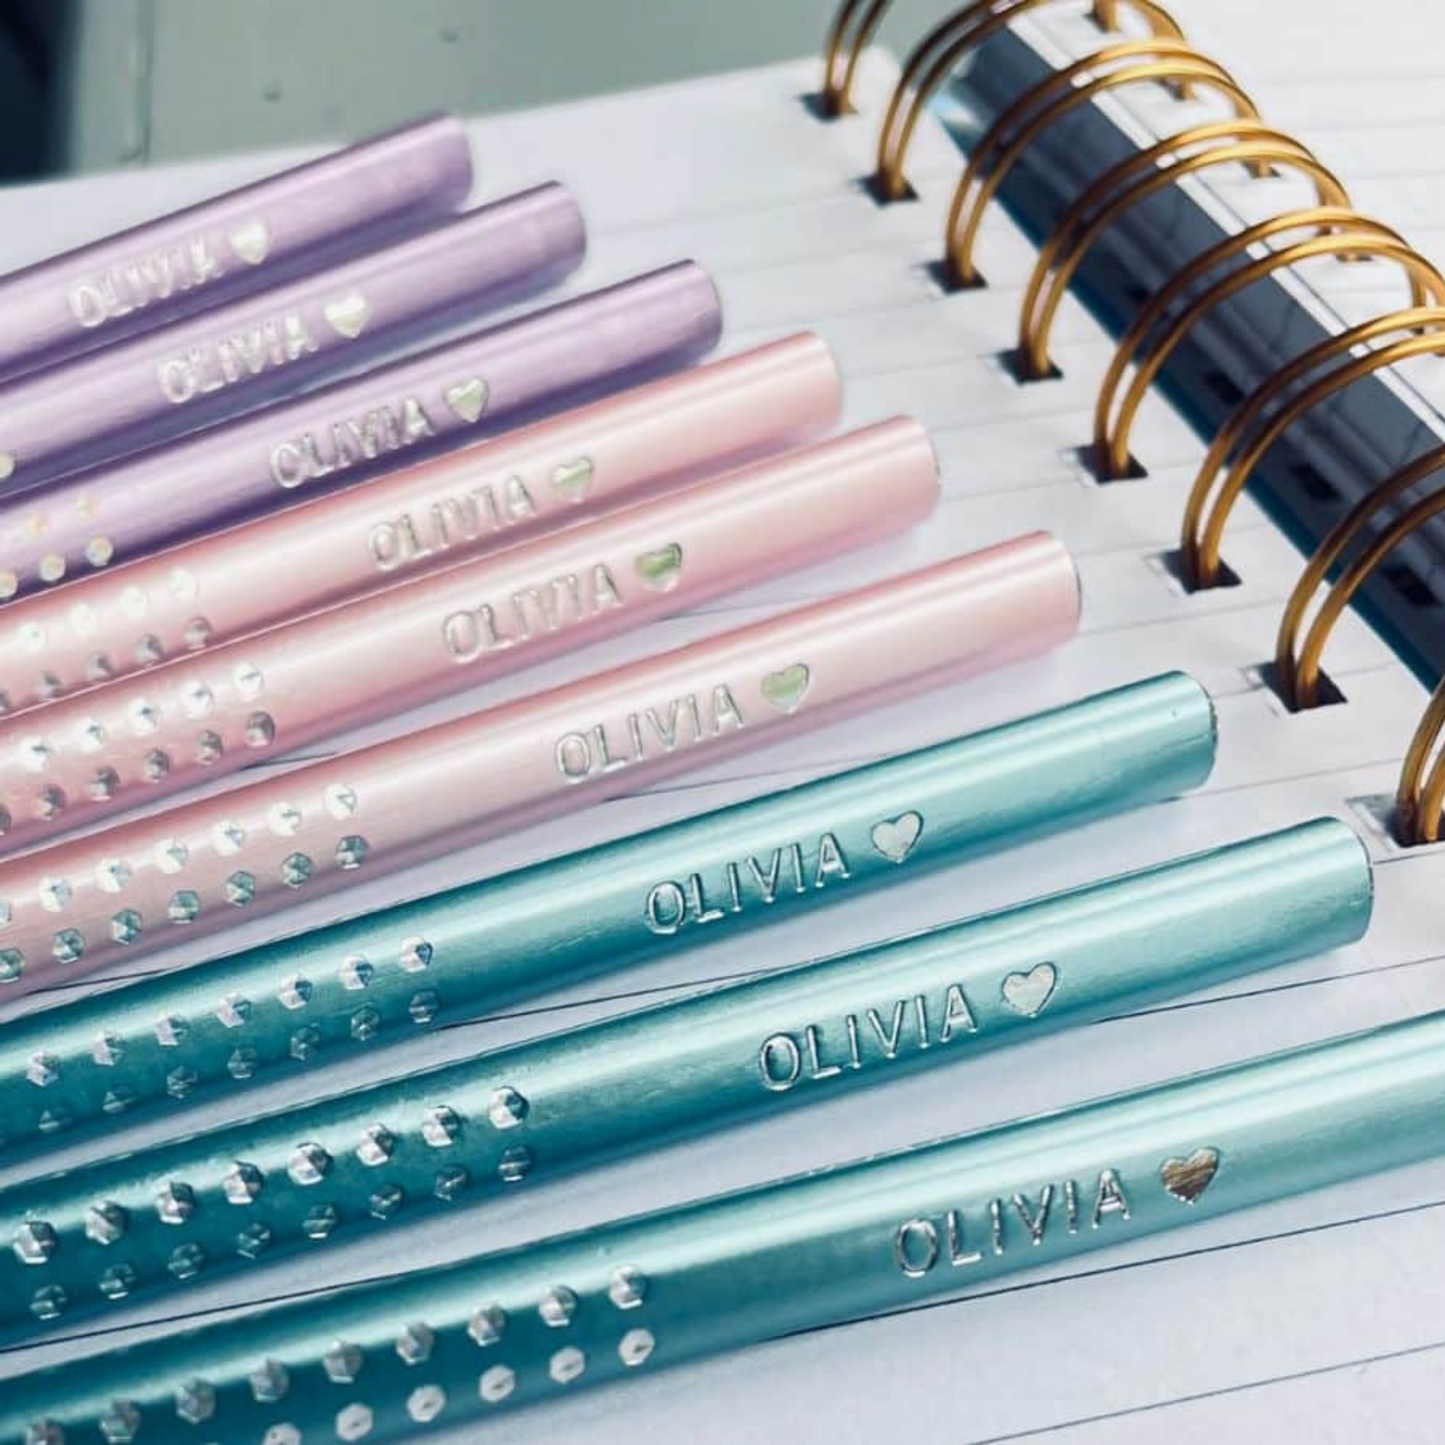 Elegant set of Faber-Castell Sparkle pencils personalized for students, displayed against a backdrop of school notebooks.